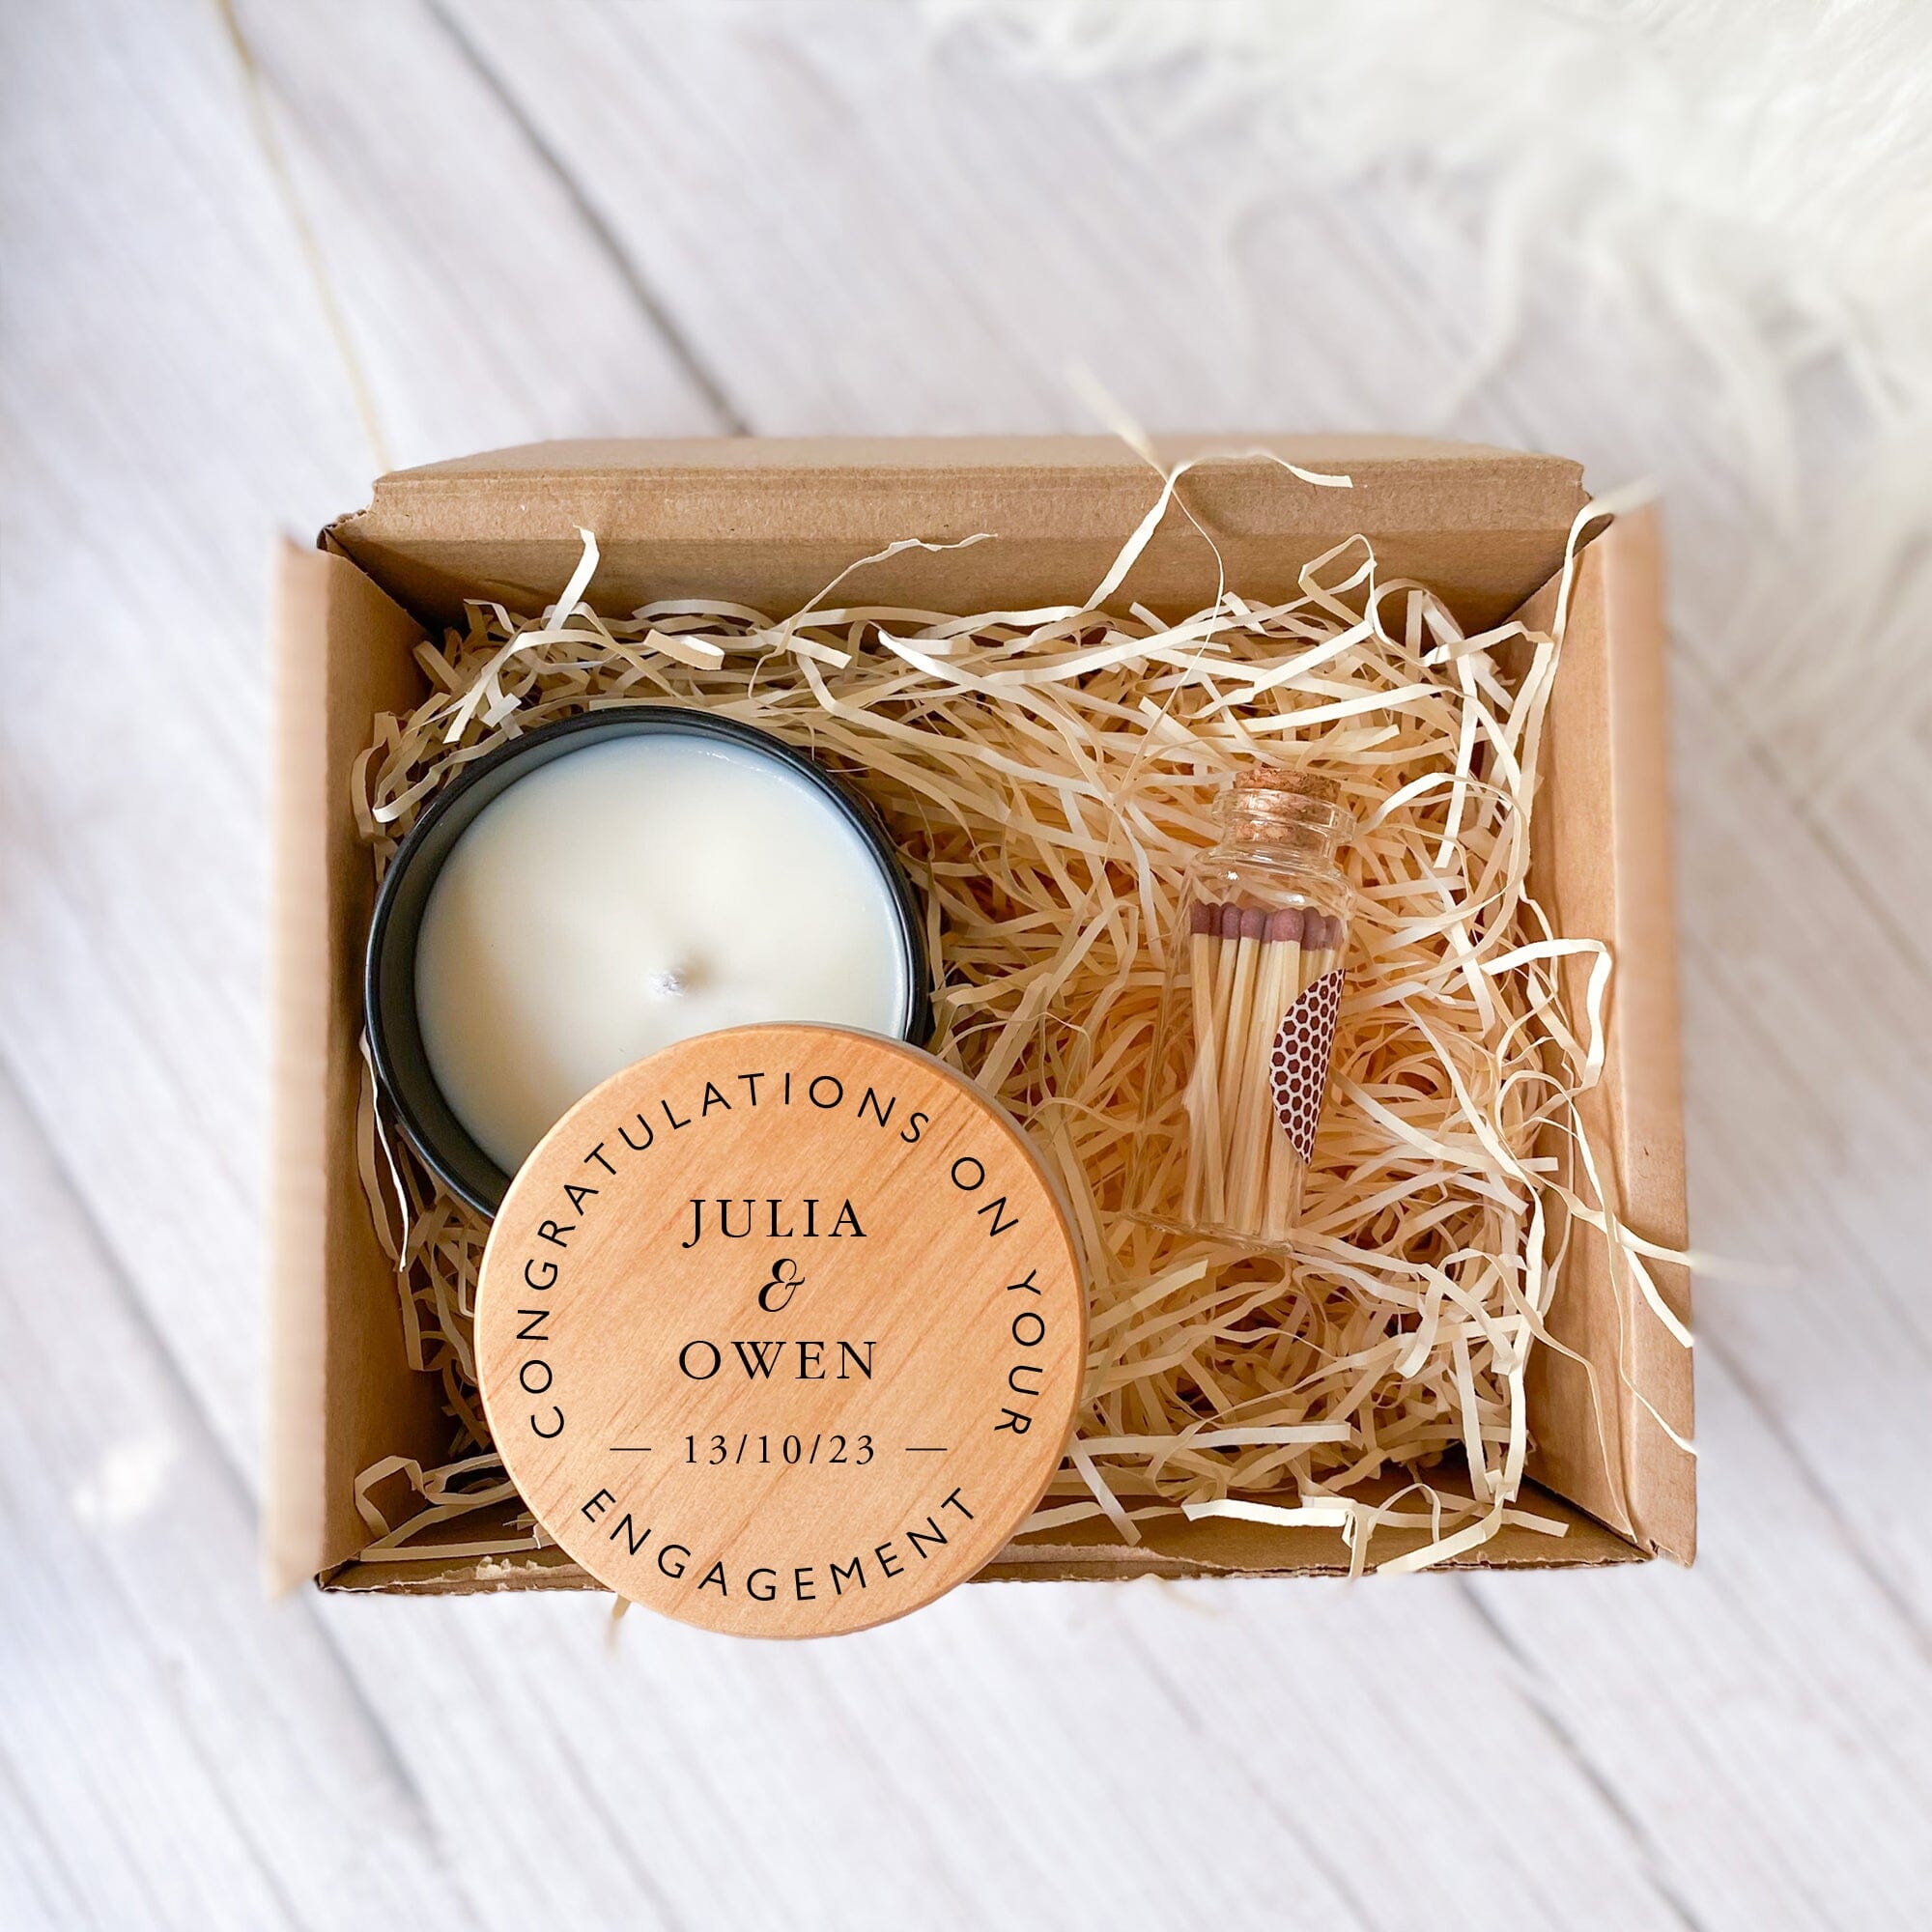 Personalised Engagement Candle with Wooden Engraving Lid and Gift Box, Gift for Engaged Couple